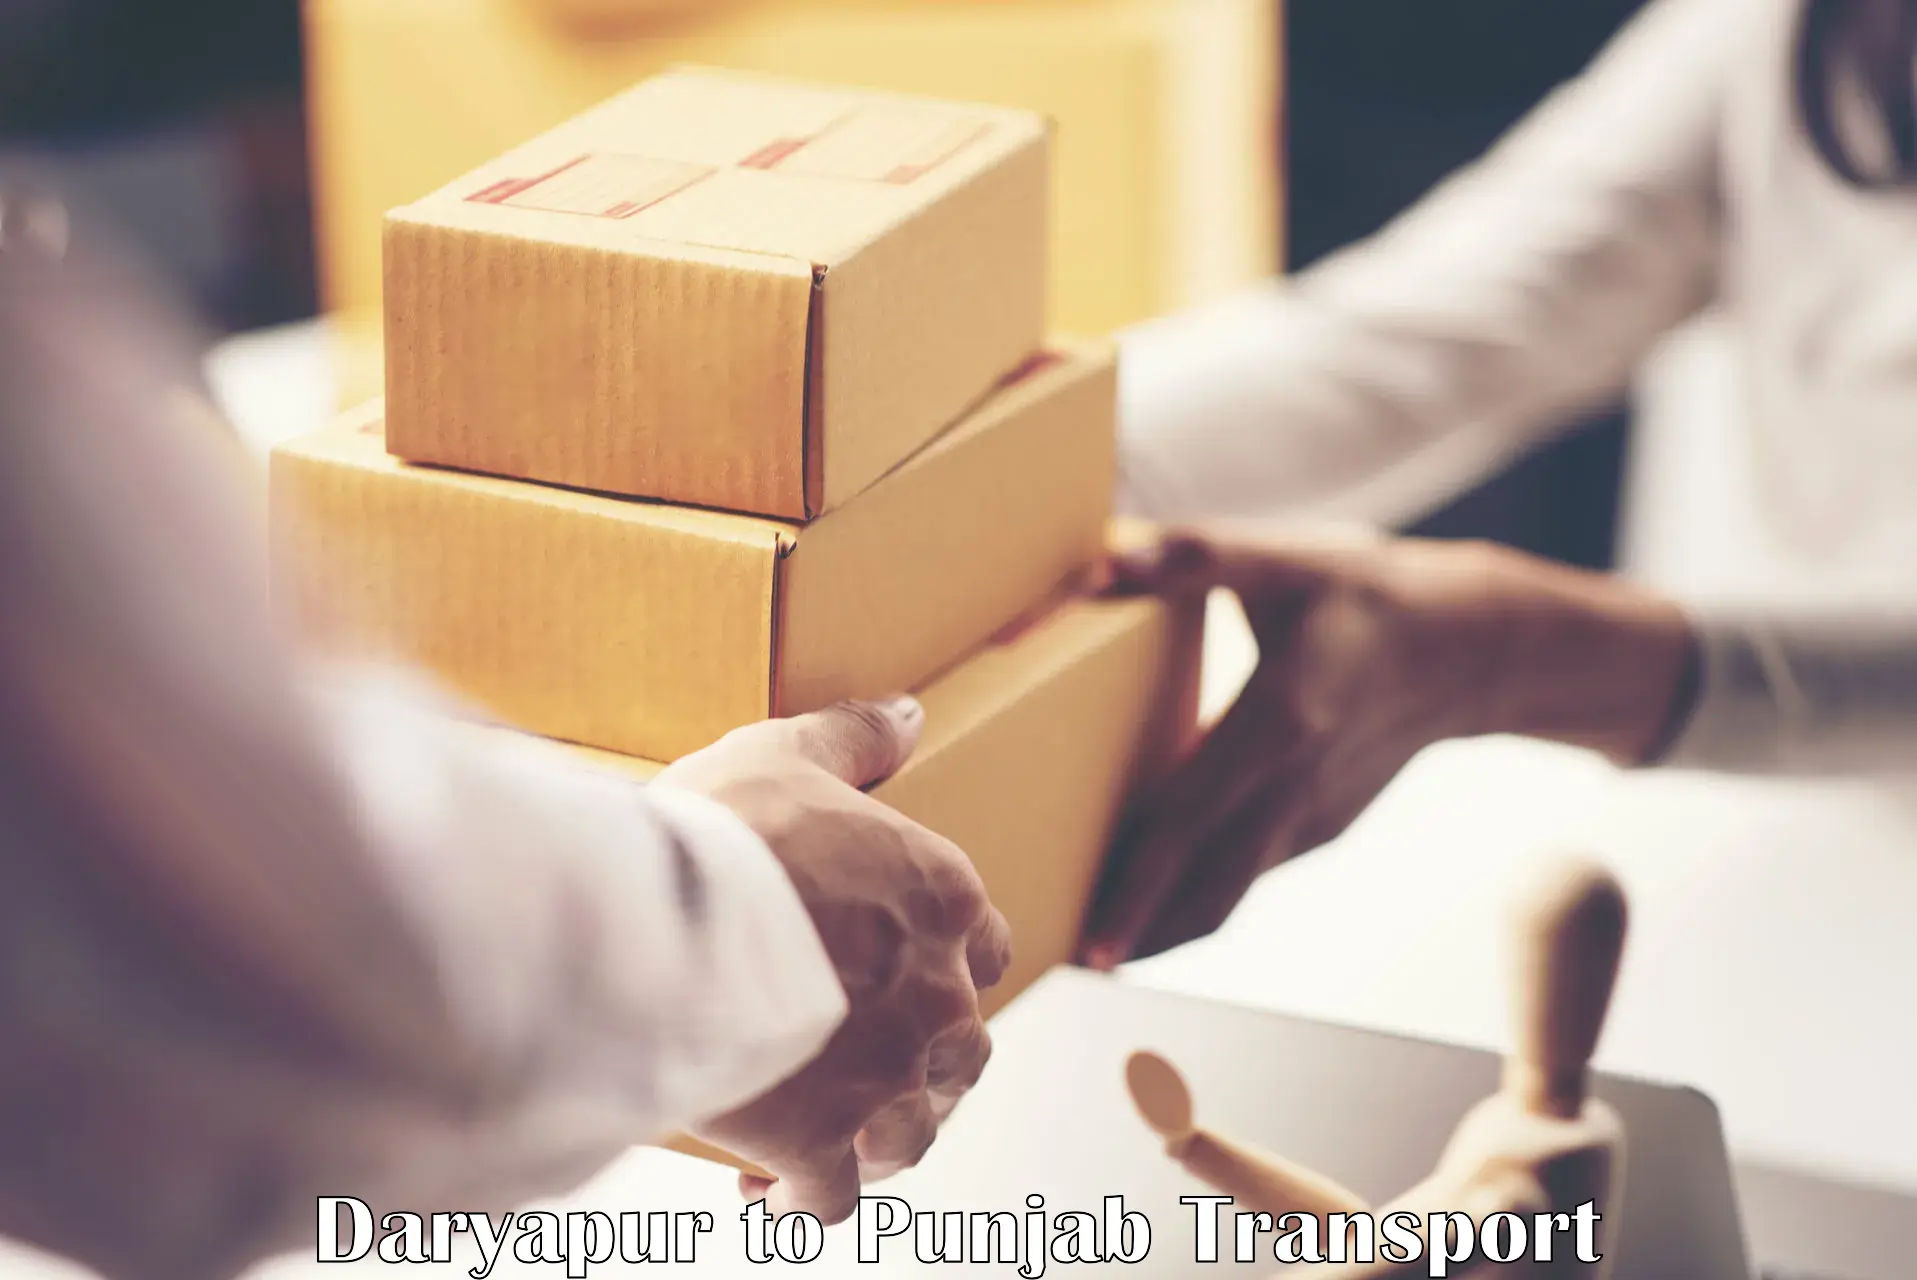 Goods delivery service Daryapur to Pathankot